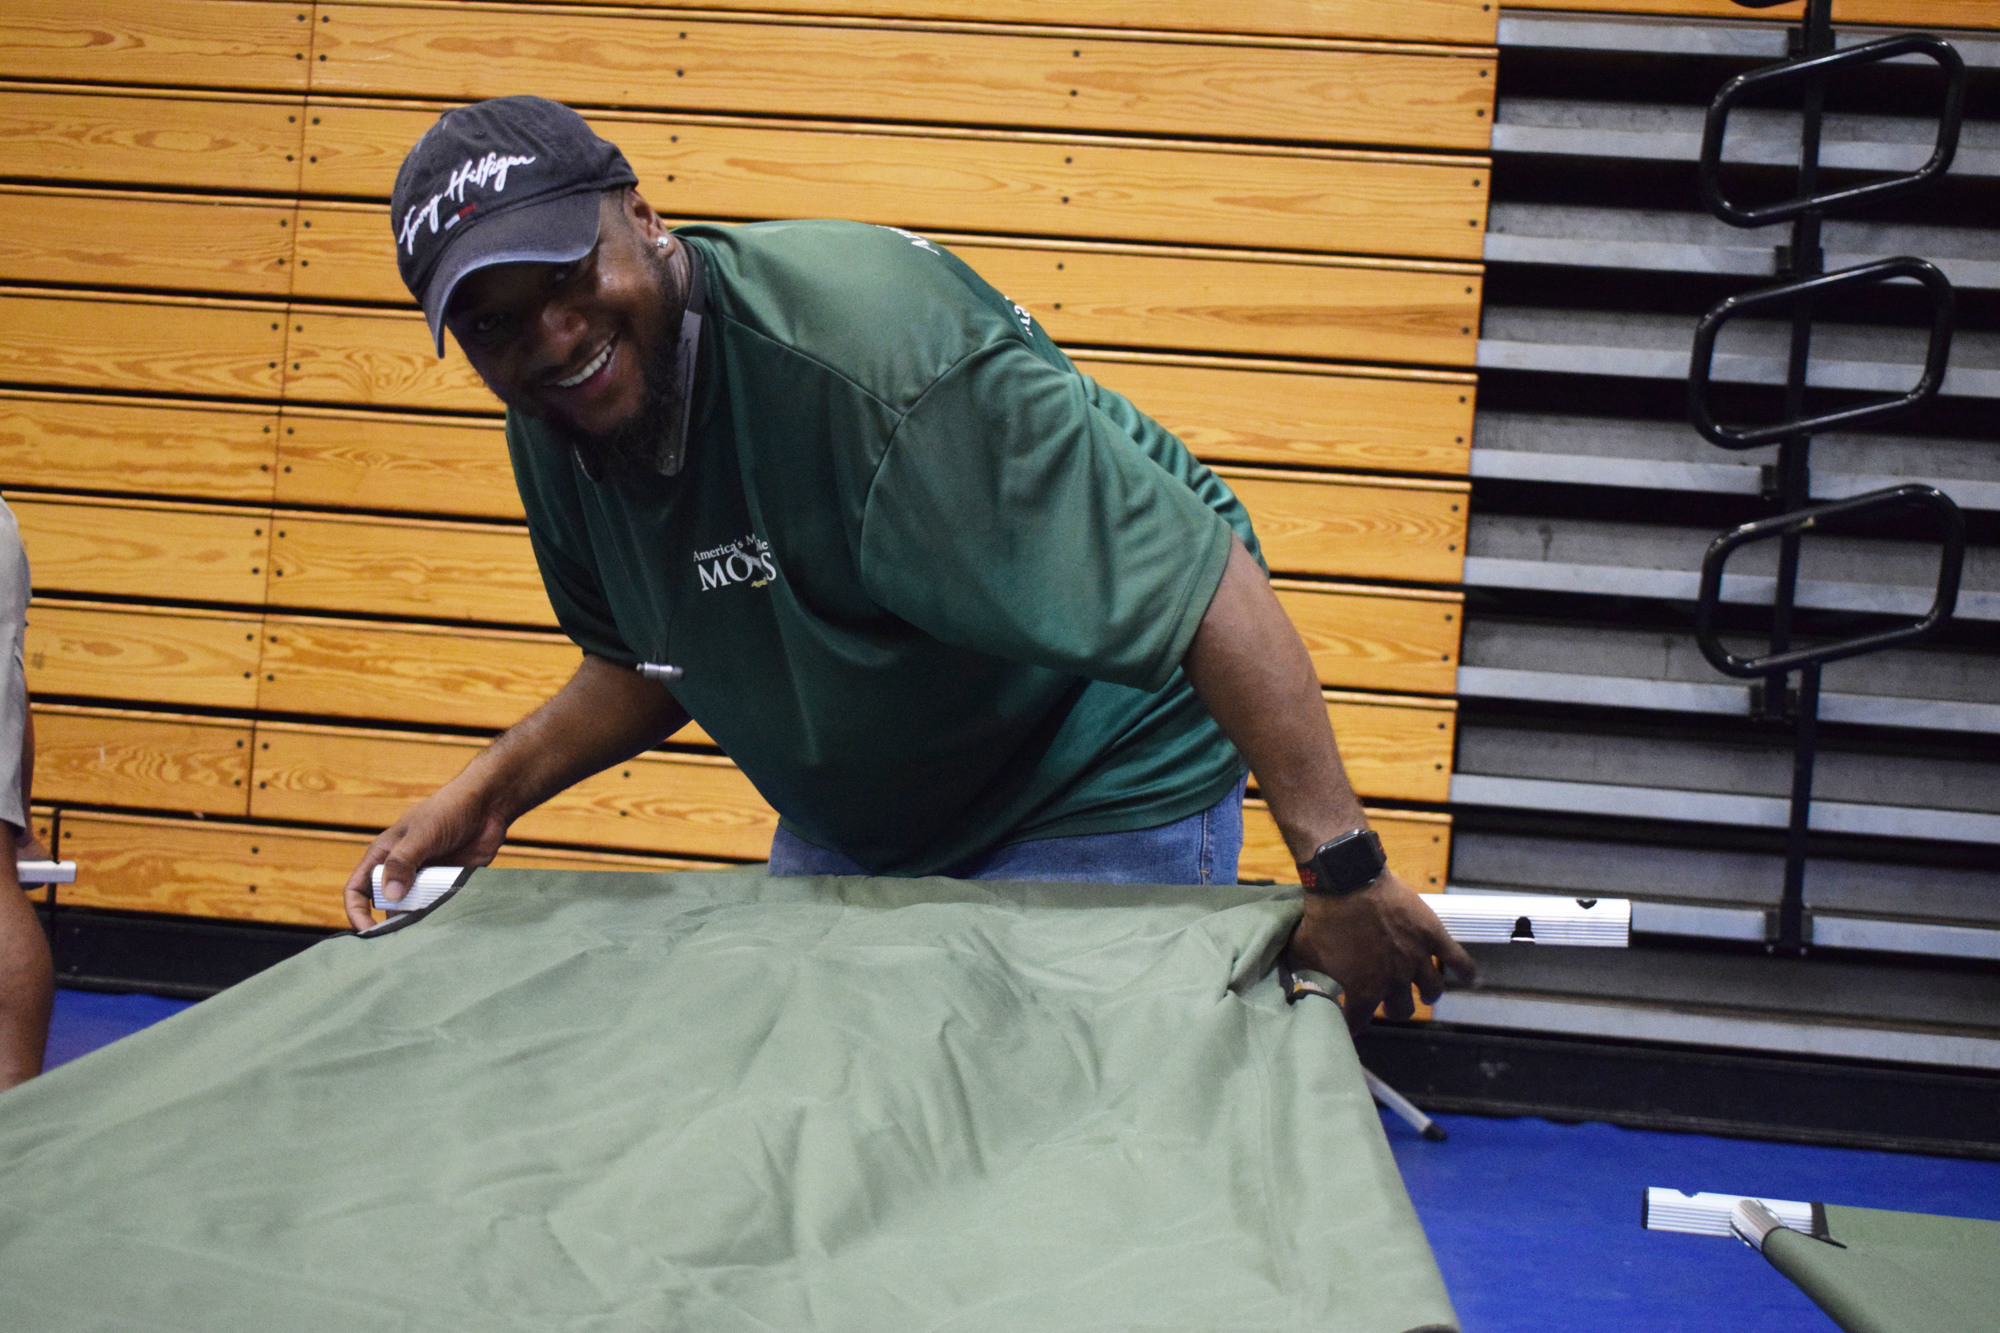 Kirey Whitehead with AMR Movers helps set up cots at R. Dan Nolan Middle School on Monday. (Photo by Liz Ramos)